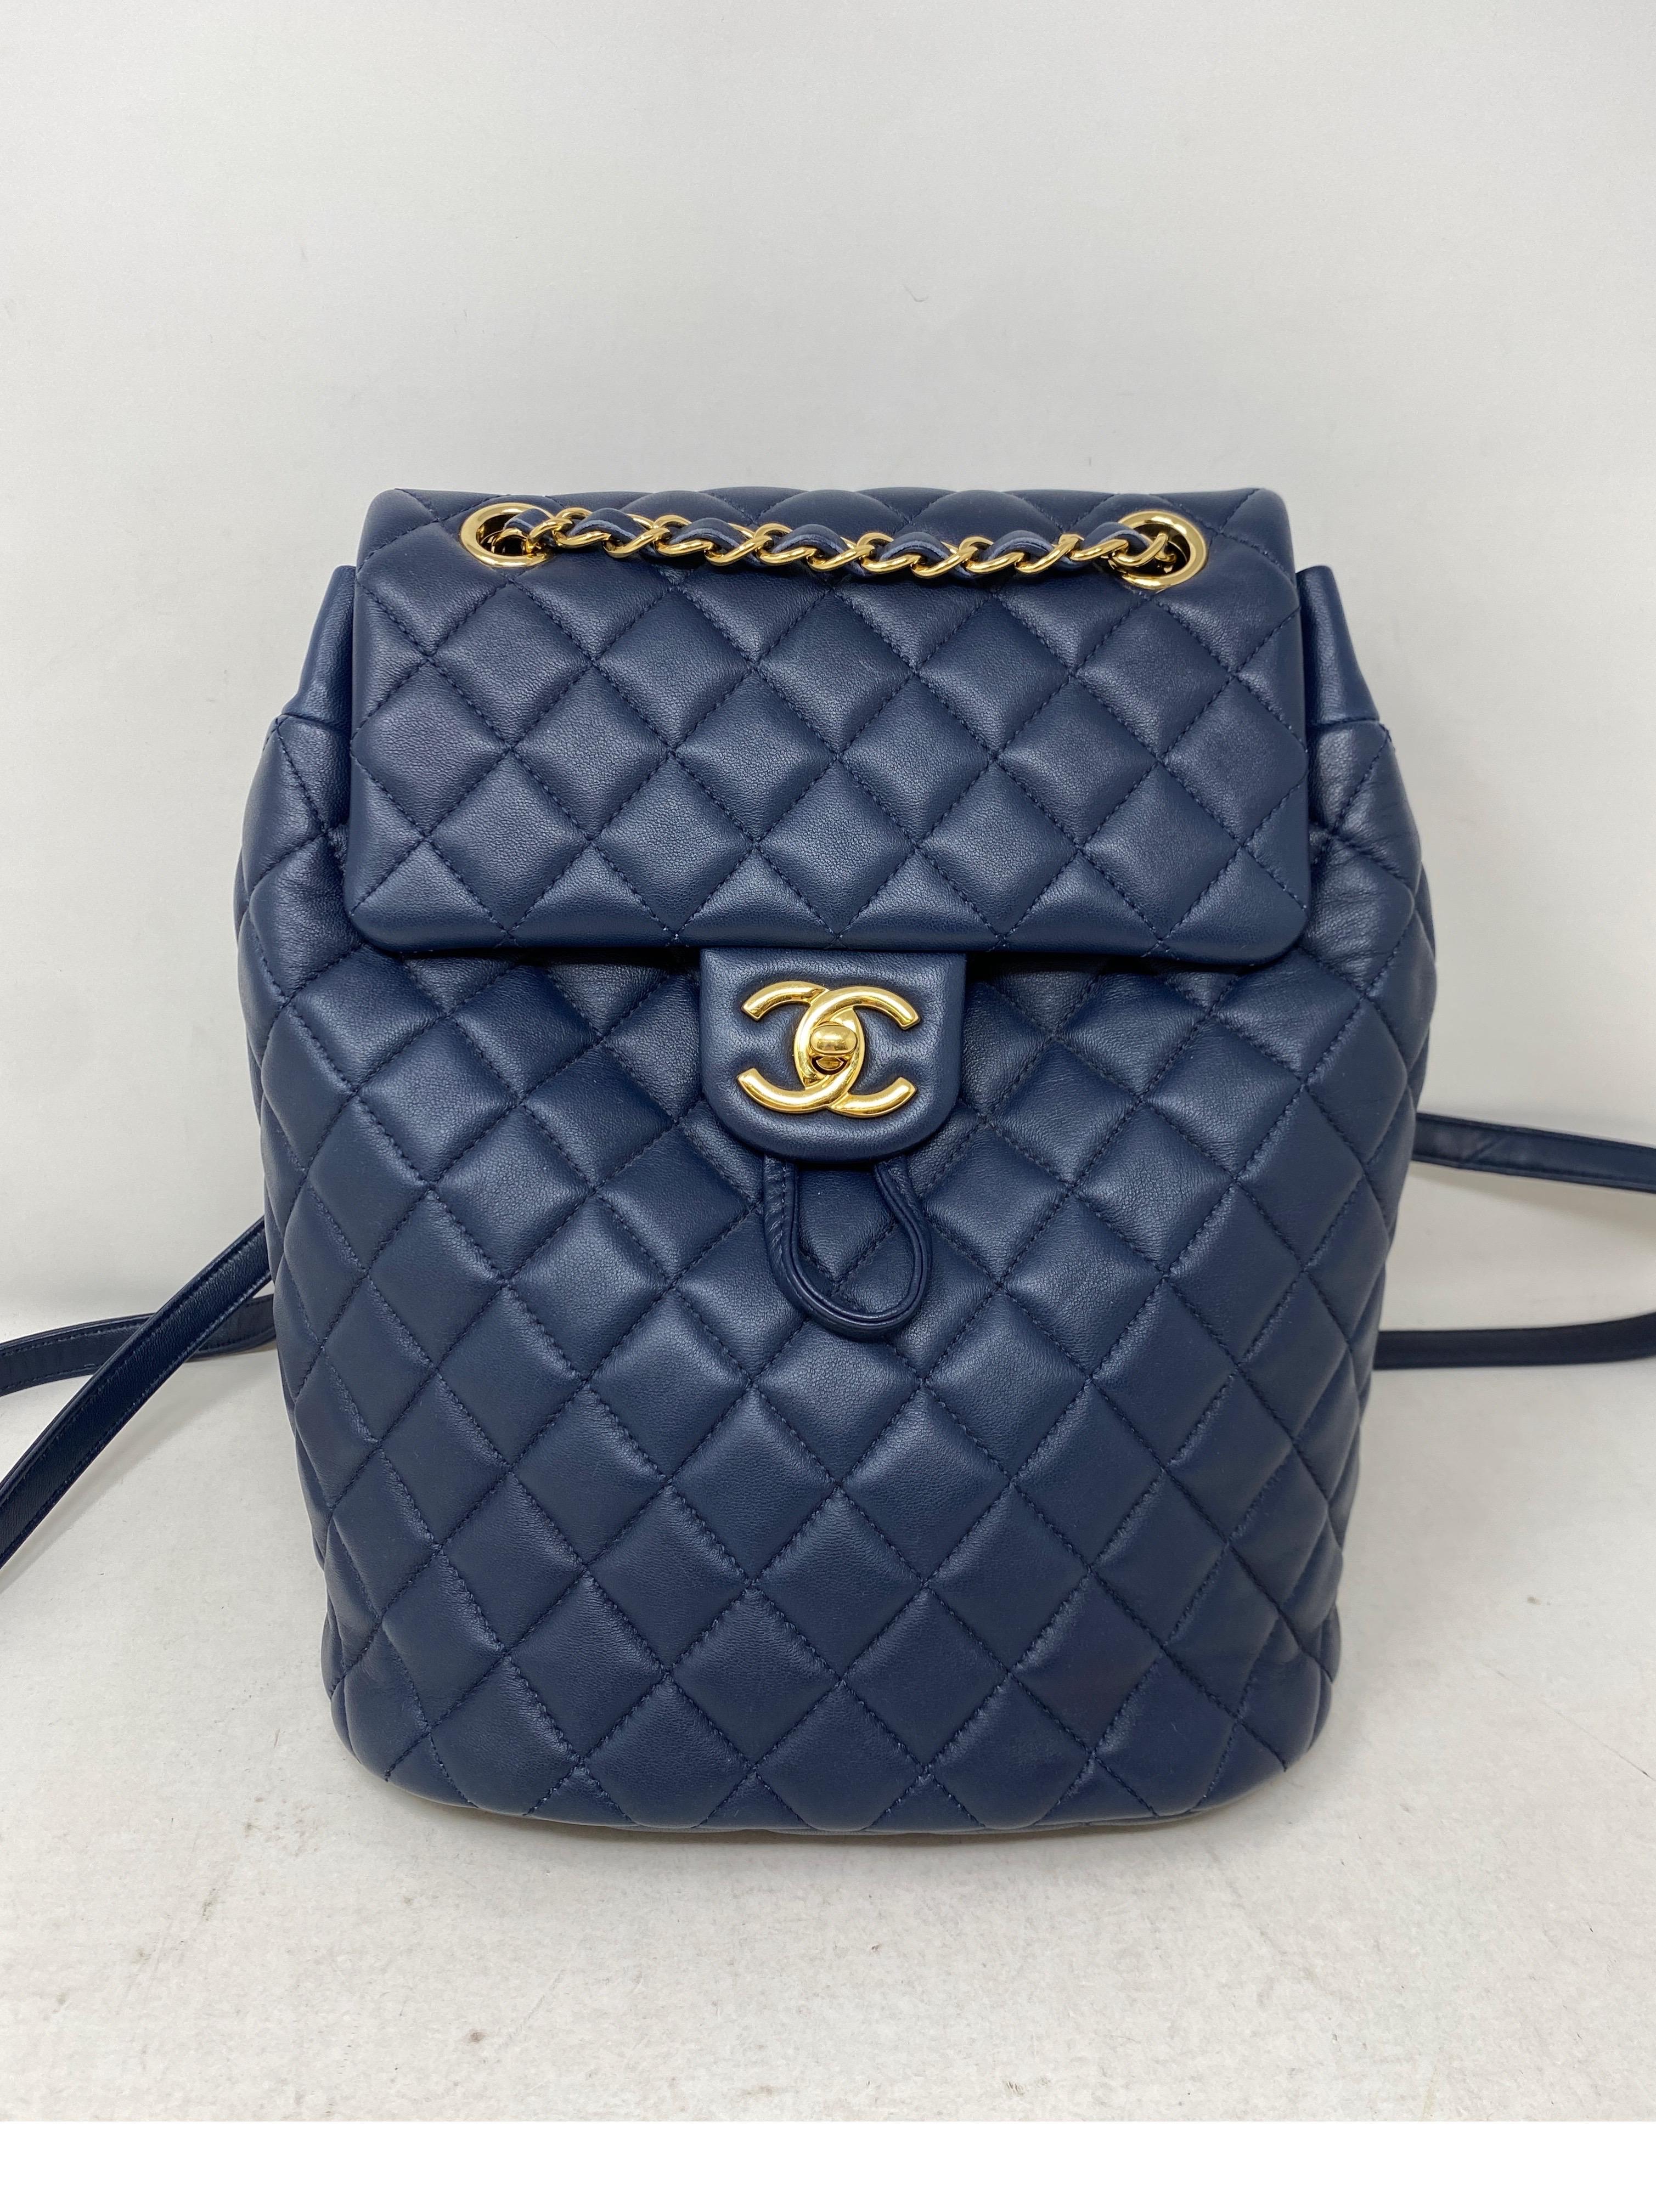 Chanel Navy Leather Backpack. Excellent like new condition. Gold hardware. Beautiful blue navy leather. Medium size backpack. Easy to carry. Serial number intact inside bag. Guaranteed authentic. 